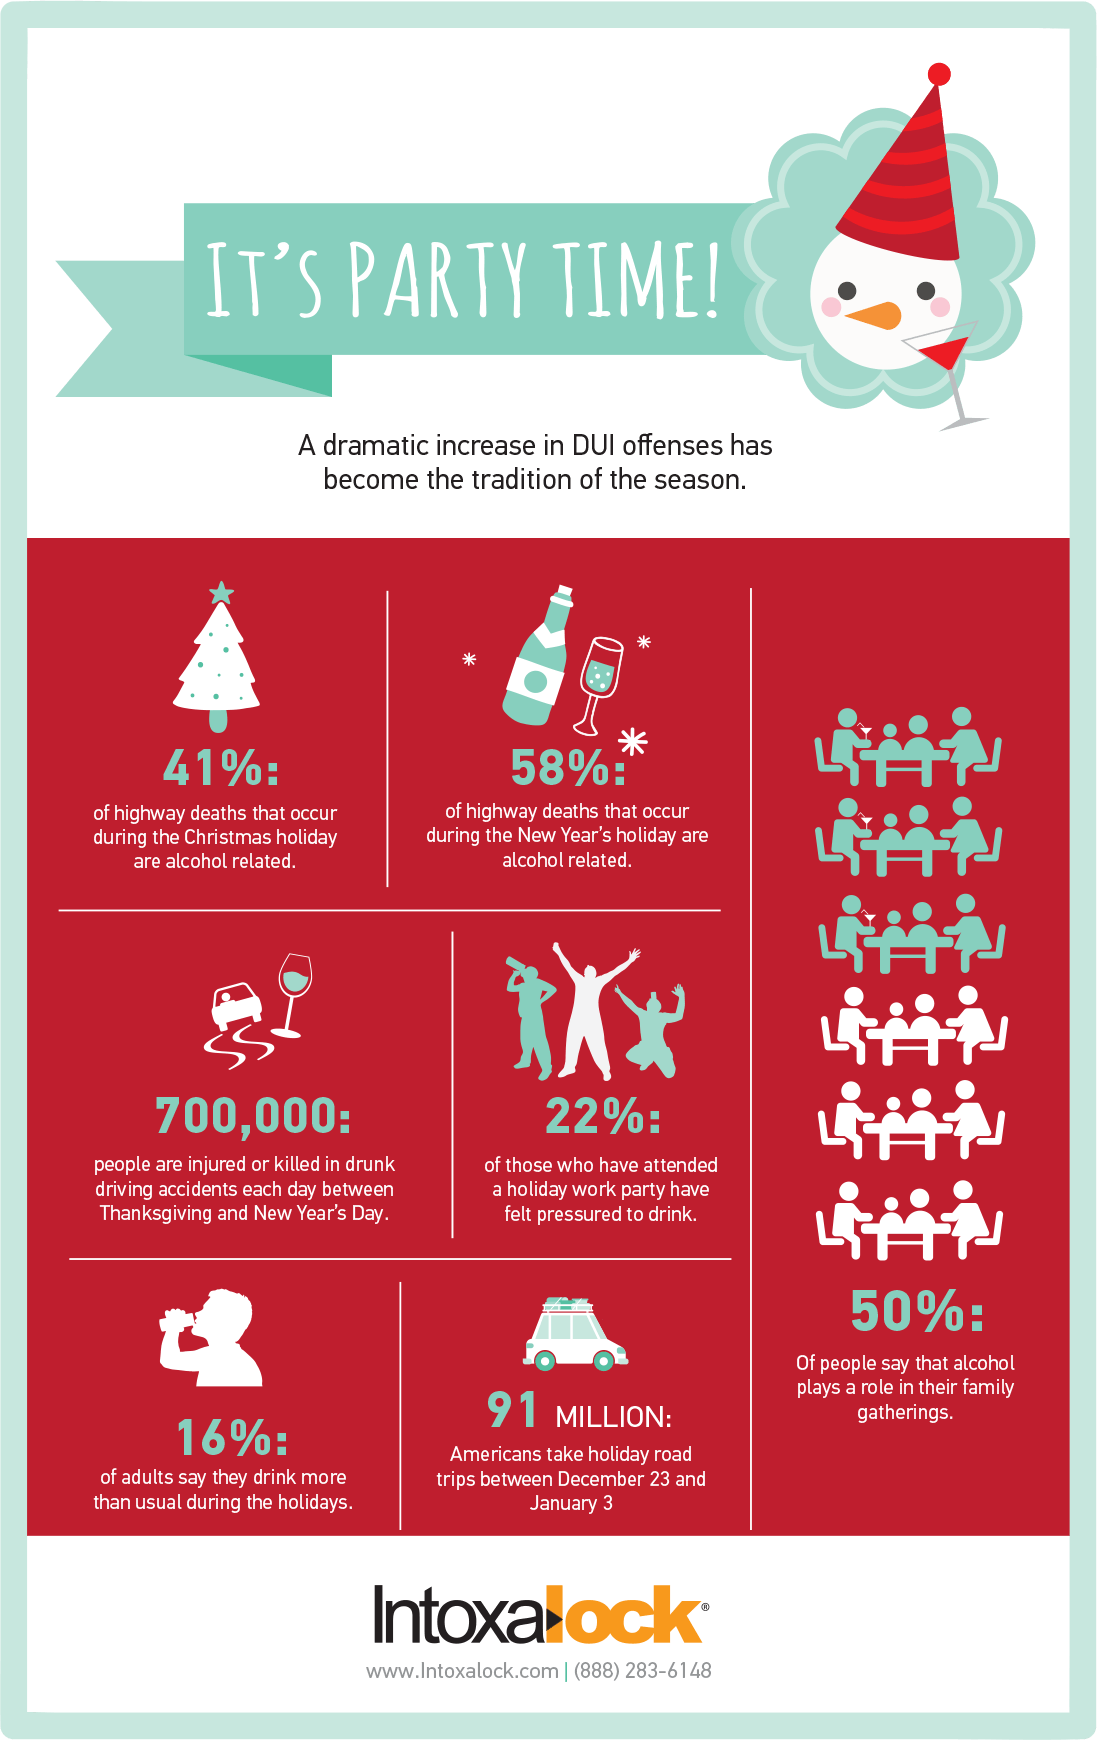 Holiday DUI statistics infographic